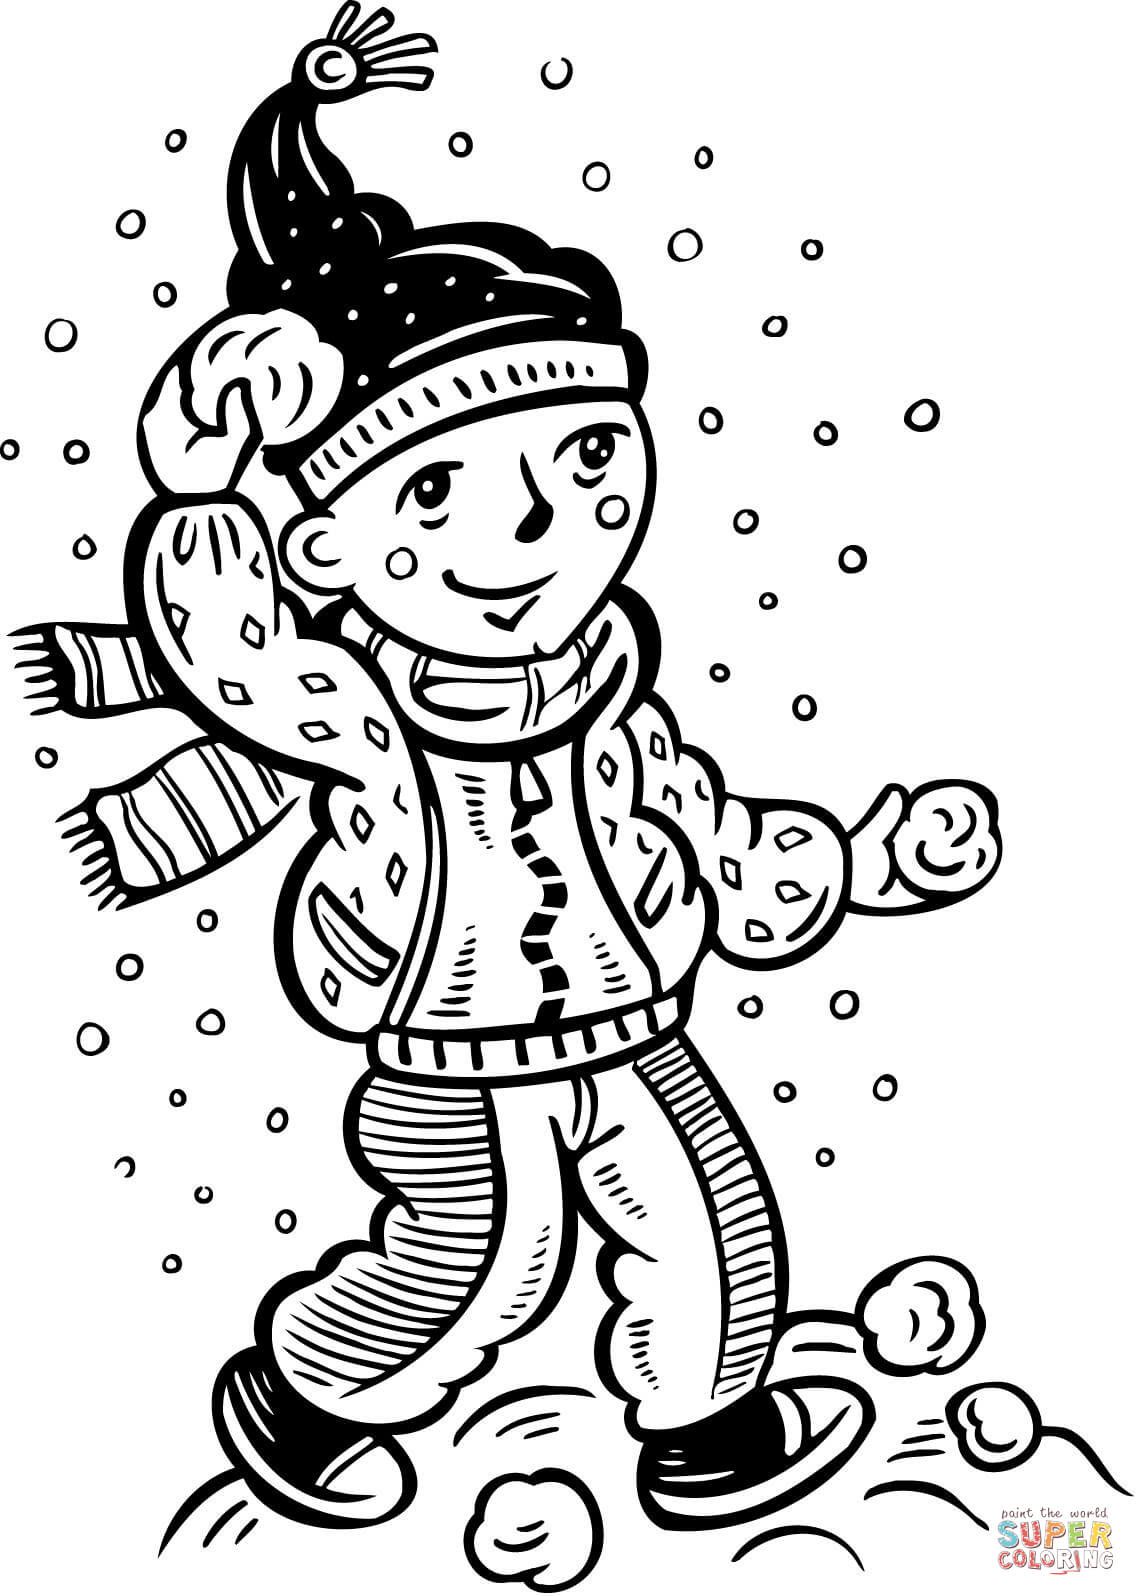 Girl in a Snowball Fight coloring page | Free Printable Coloring Pages